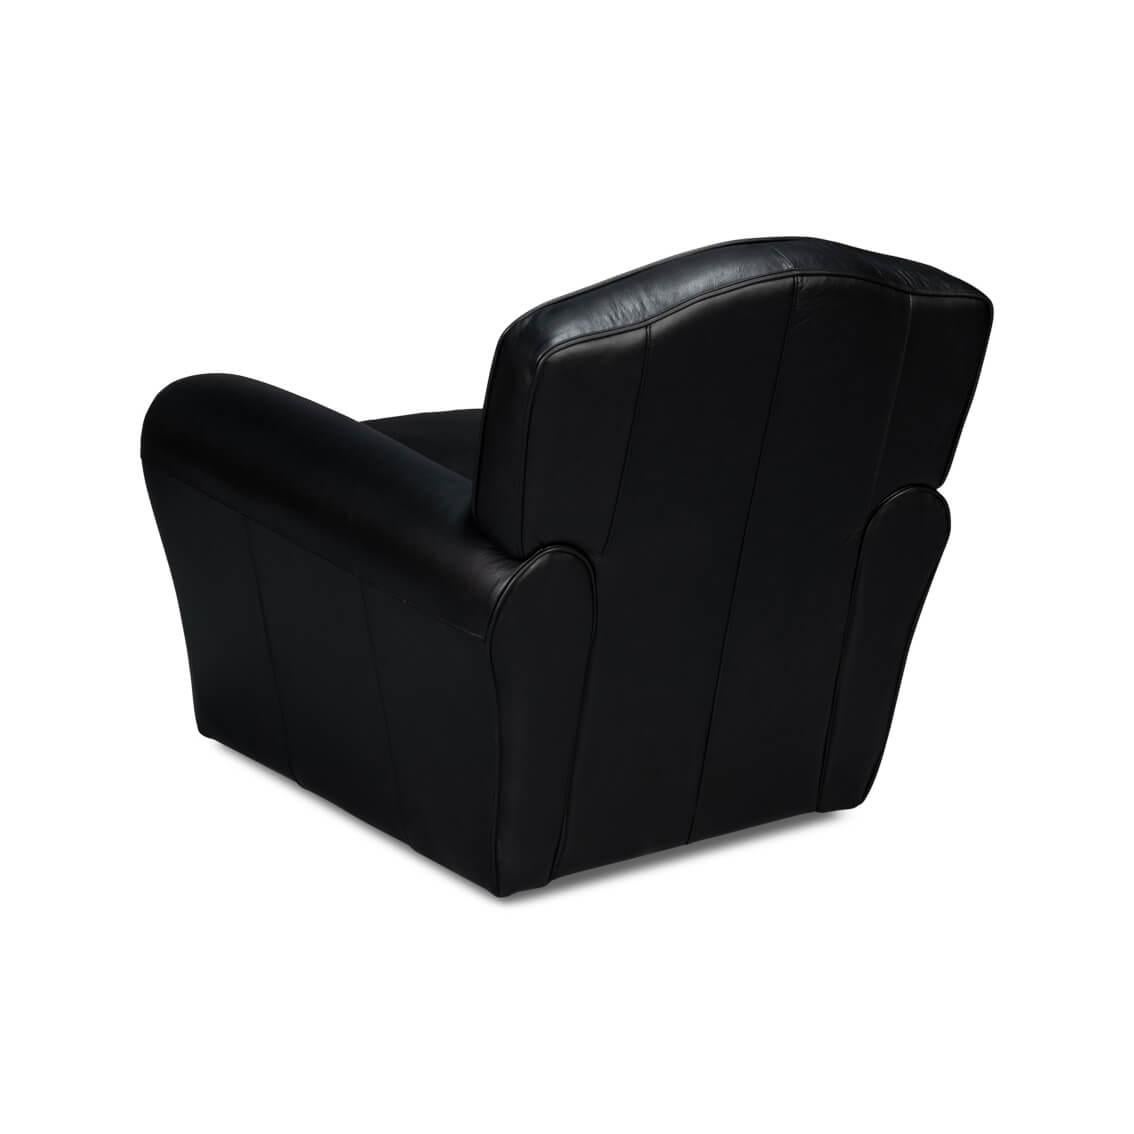 Contemporary French Art Deco Style Black Leather Club Chair For Sale